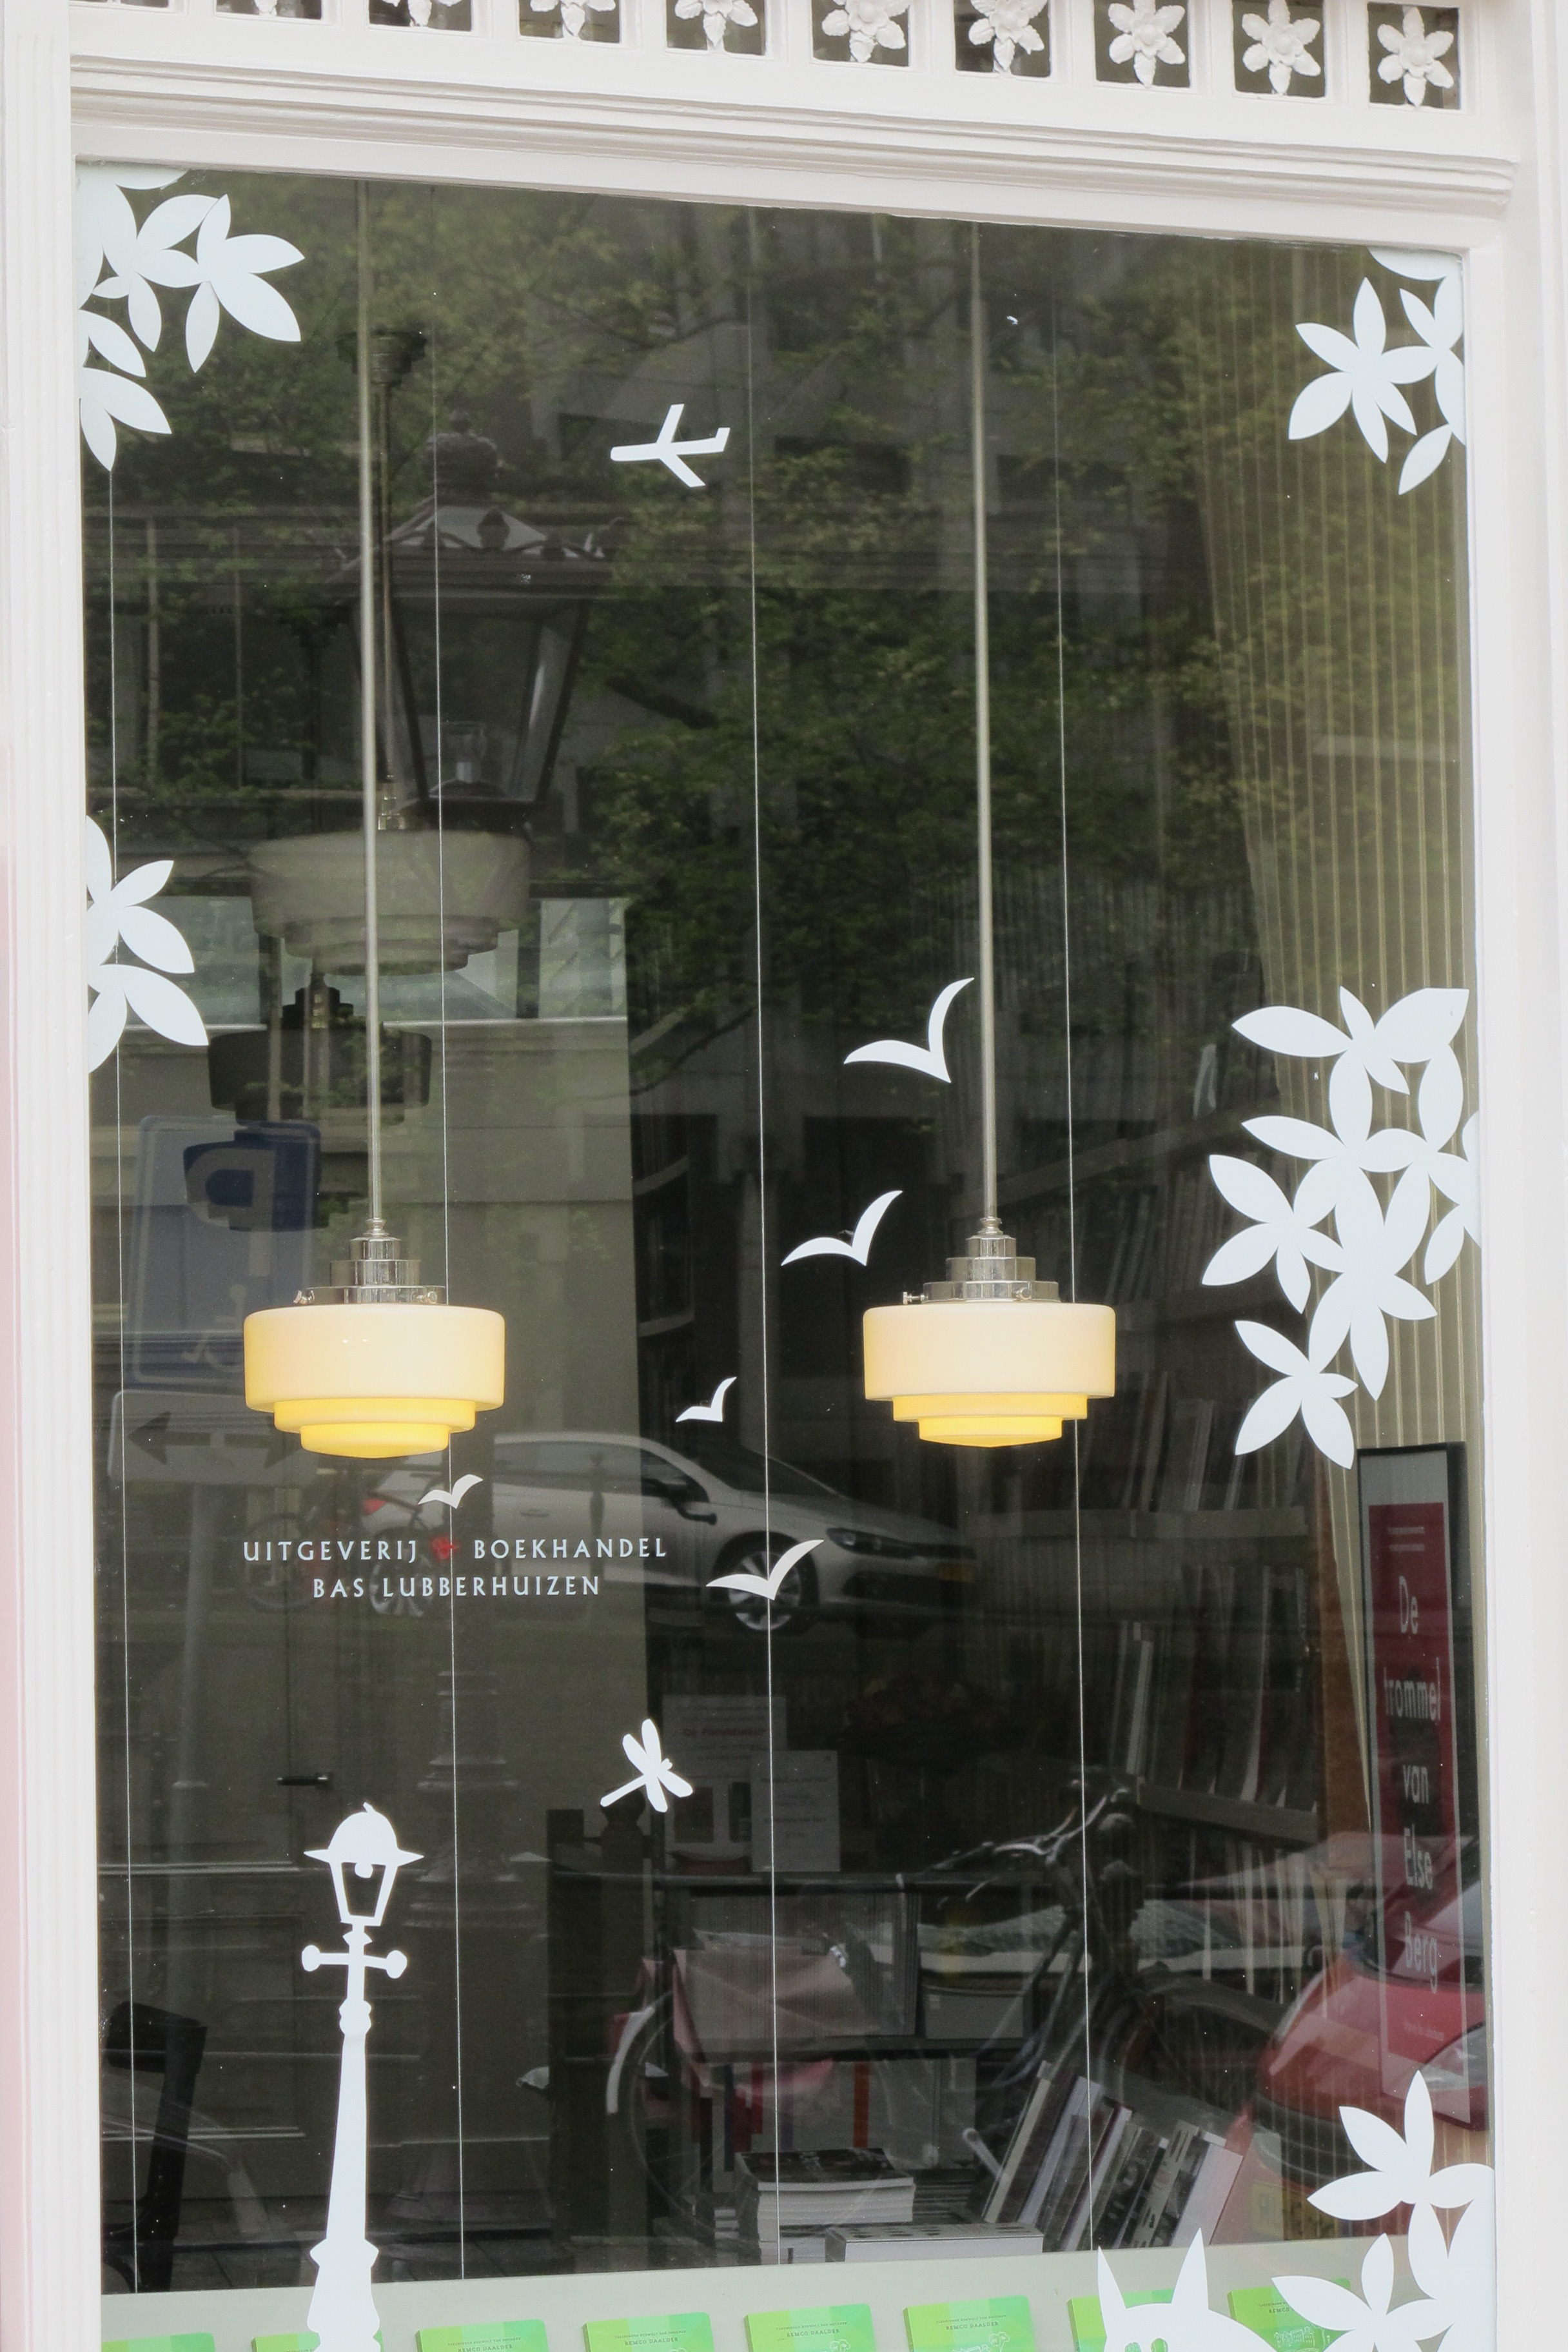  Window decorations for publishing house Bas Lubberhuizen, in Amsterdam, the Netherlands. 